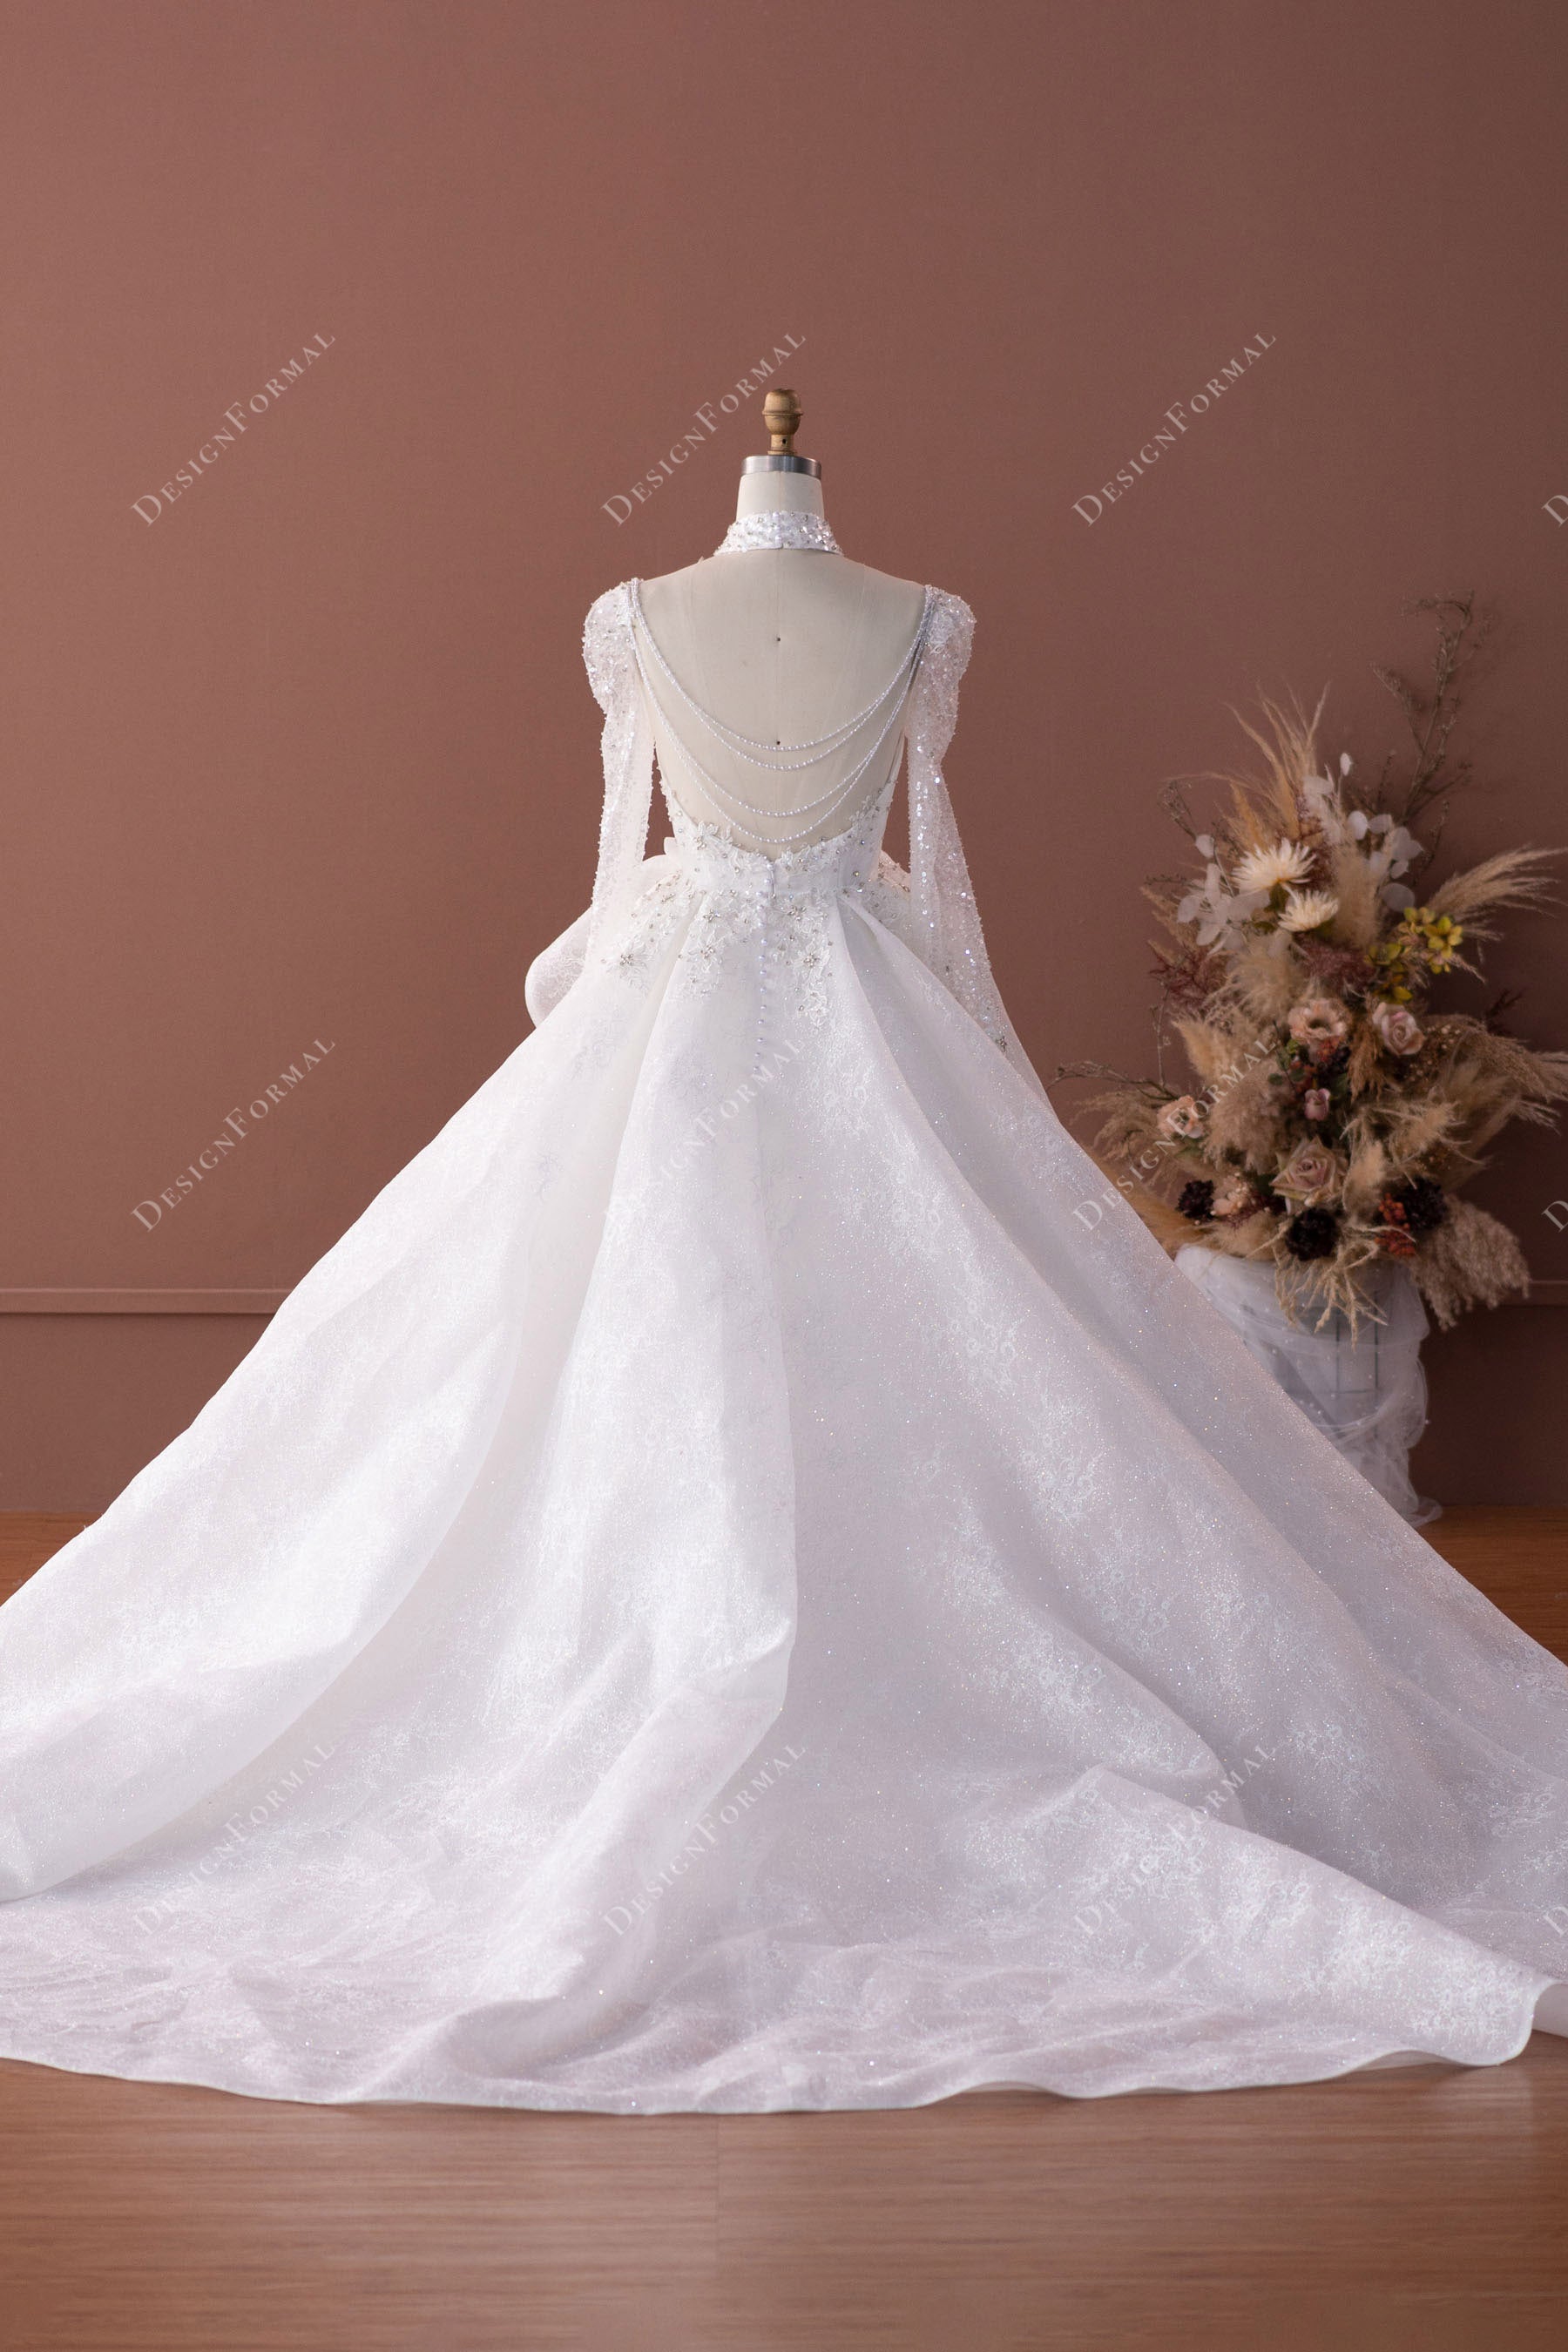 pearls chains open back ball gown bridal dress